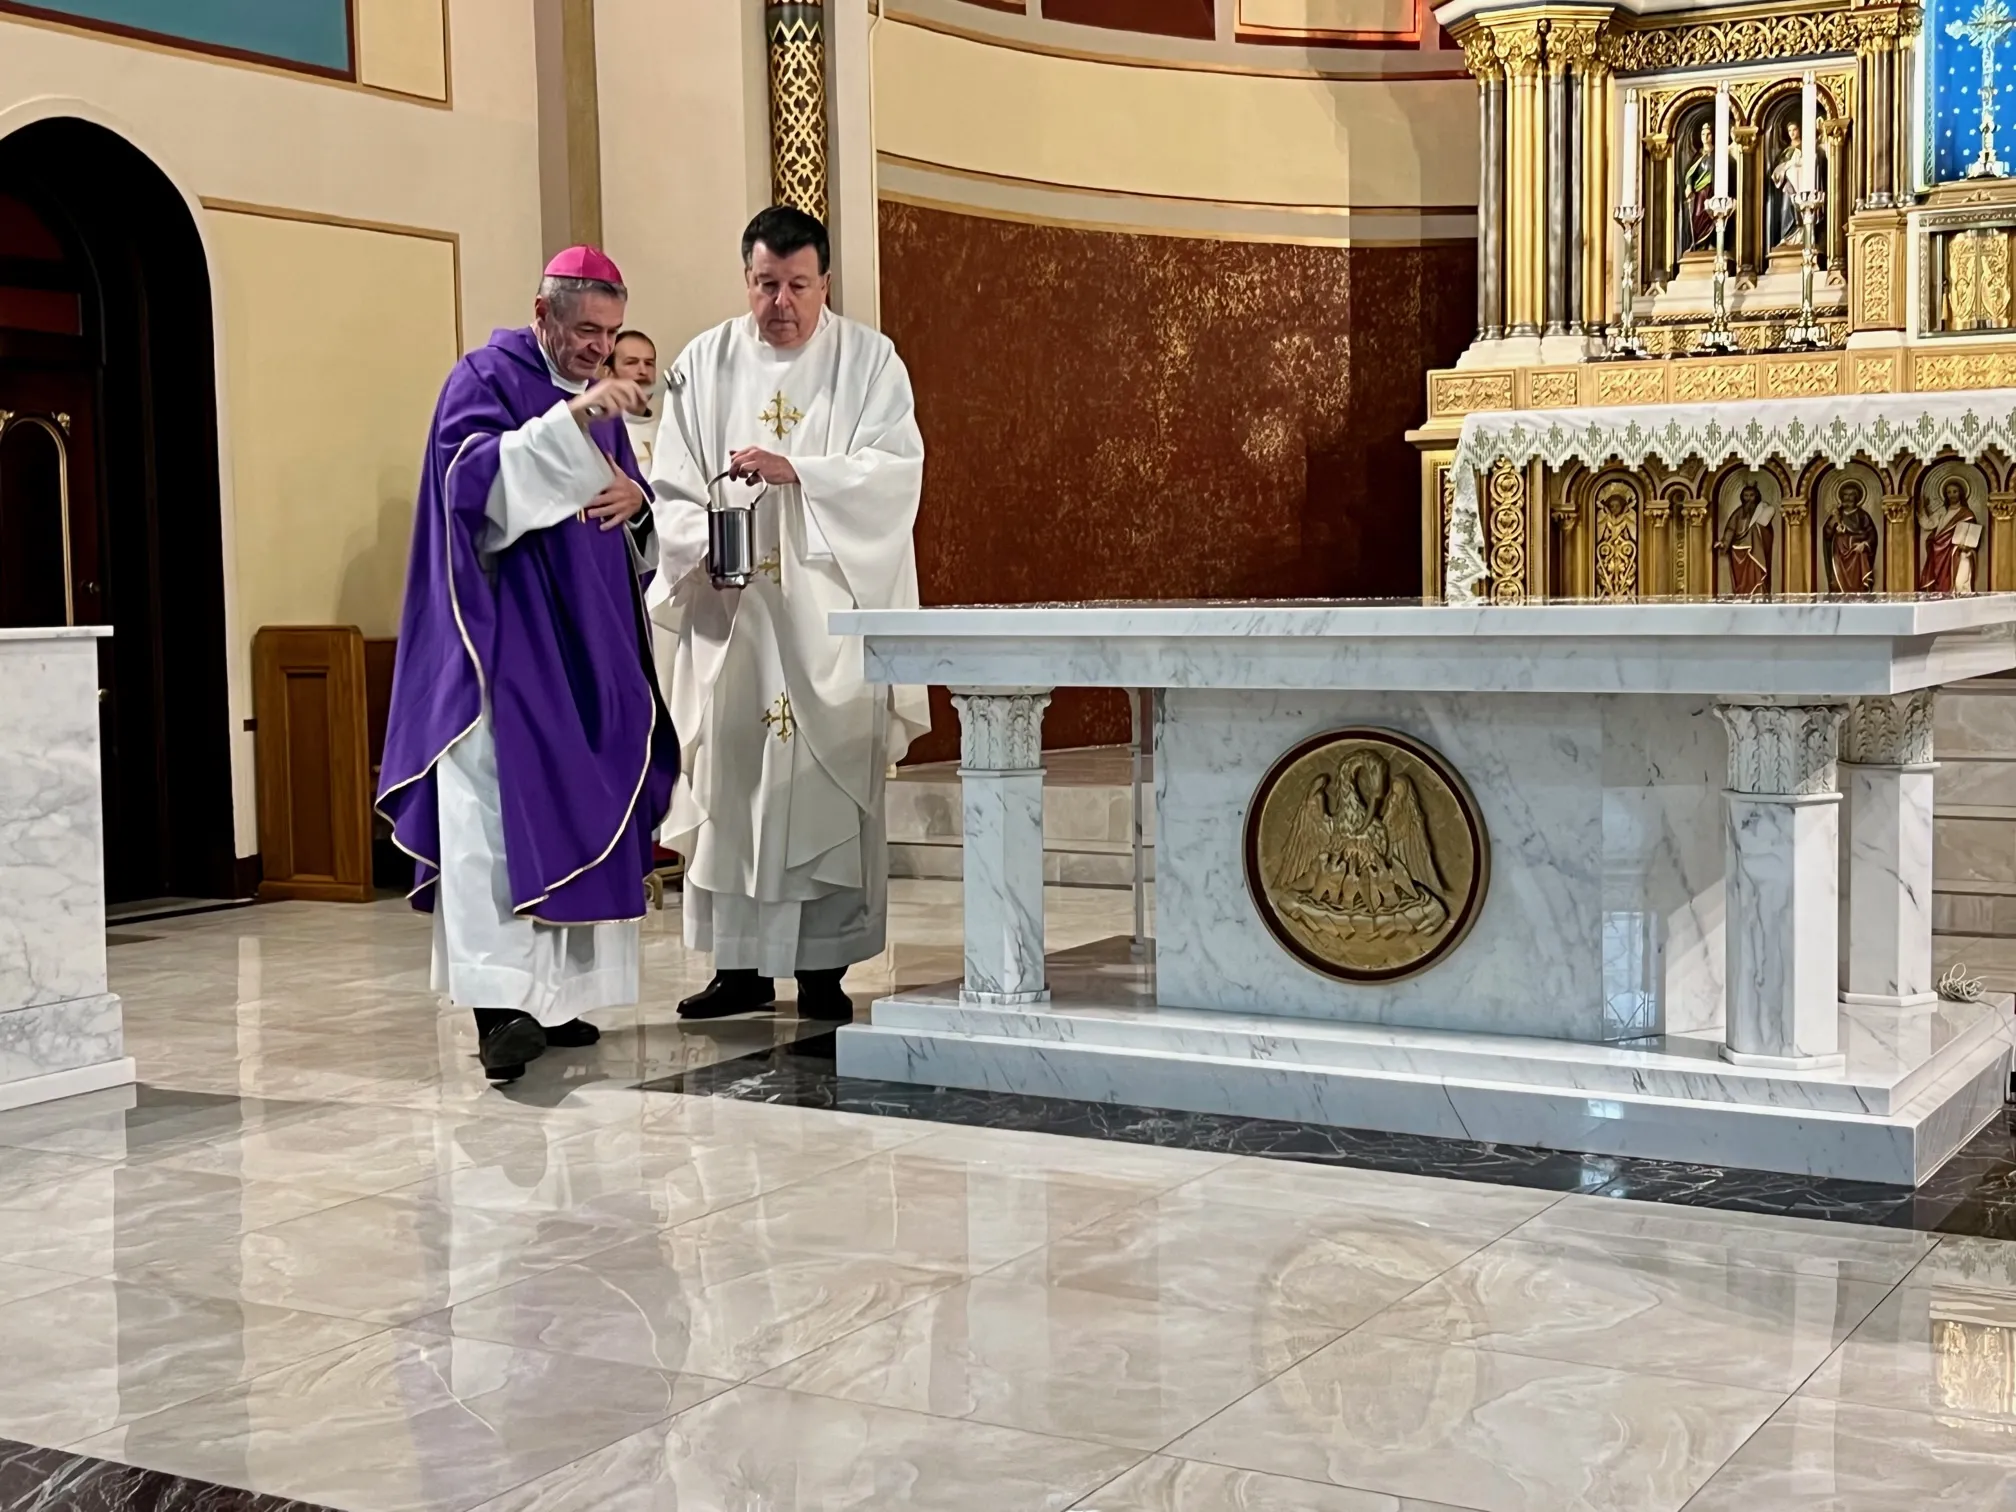 Bishop Robert Brennan blesses the altar at Annunciation of the Blessed Virgin Mary Church in Brooklyn, New York, with holy water on Nov. 4, 2023, in response to the filming of an indecent music video in the church. Assisting the bishop is Monsignor Joseph Grimaldi, vicar general of the Diocese of Brooklyn.?w=200&h=150